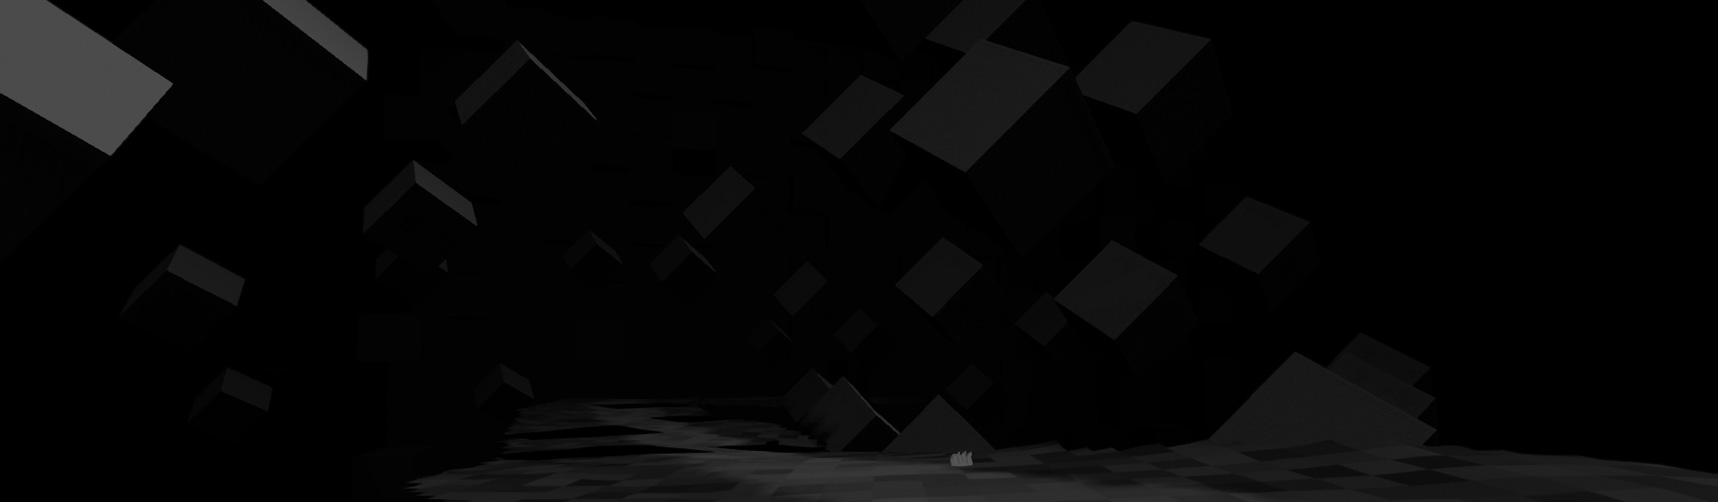 An abstract dark floating road with shadowed cubes surrounding the road on all sides